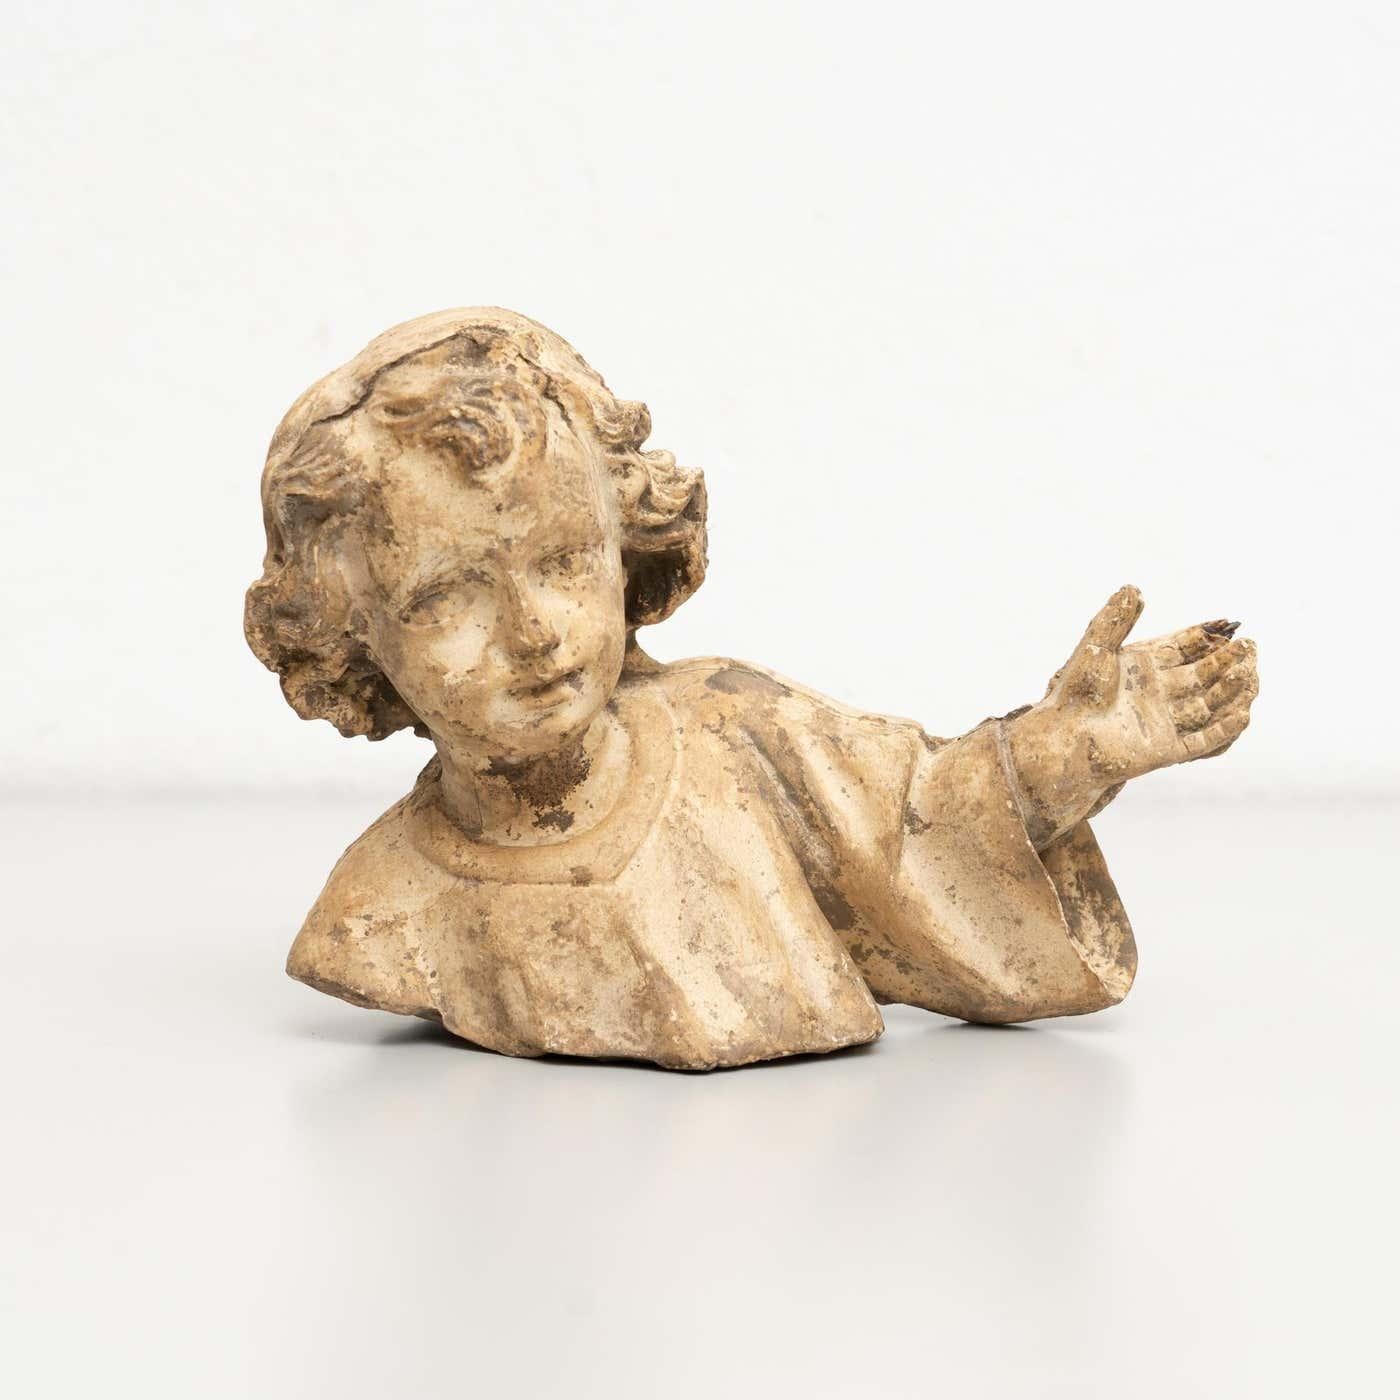 Traditional religious plaster figure of a baby Jesus.

Made in traditional Catalan atelier in Olot, Spain, circa 1950.

In original condition, with minor wear consistent with age and use, preserving a beautiful patina.

Materials:
Plaster.
 